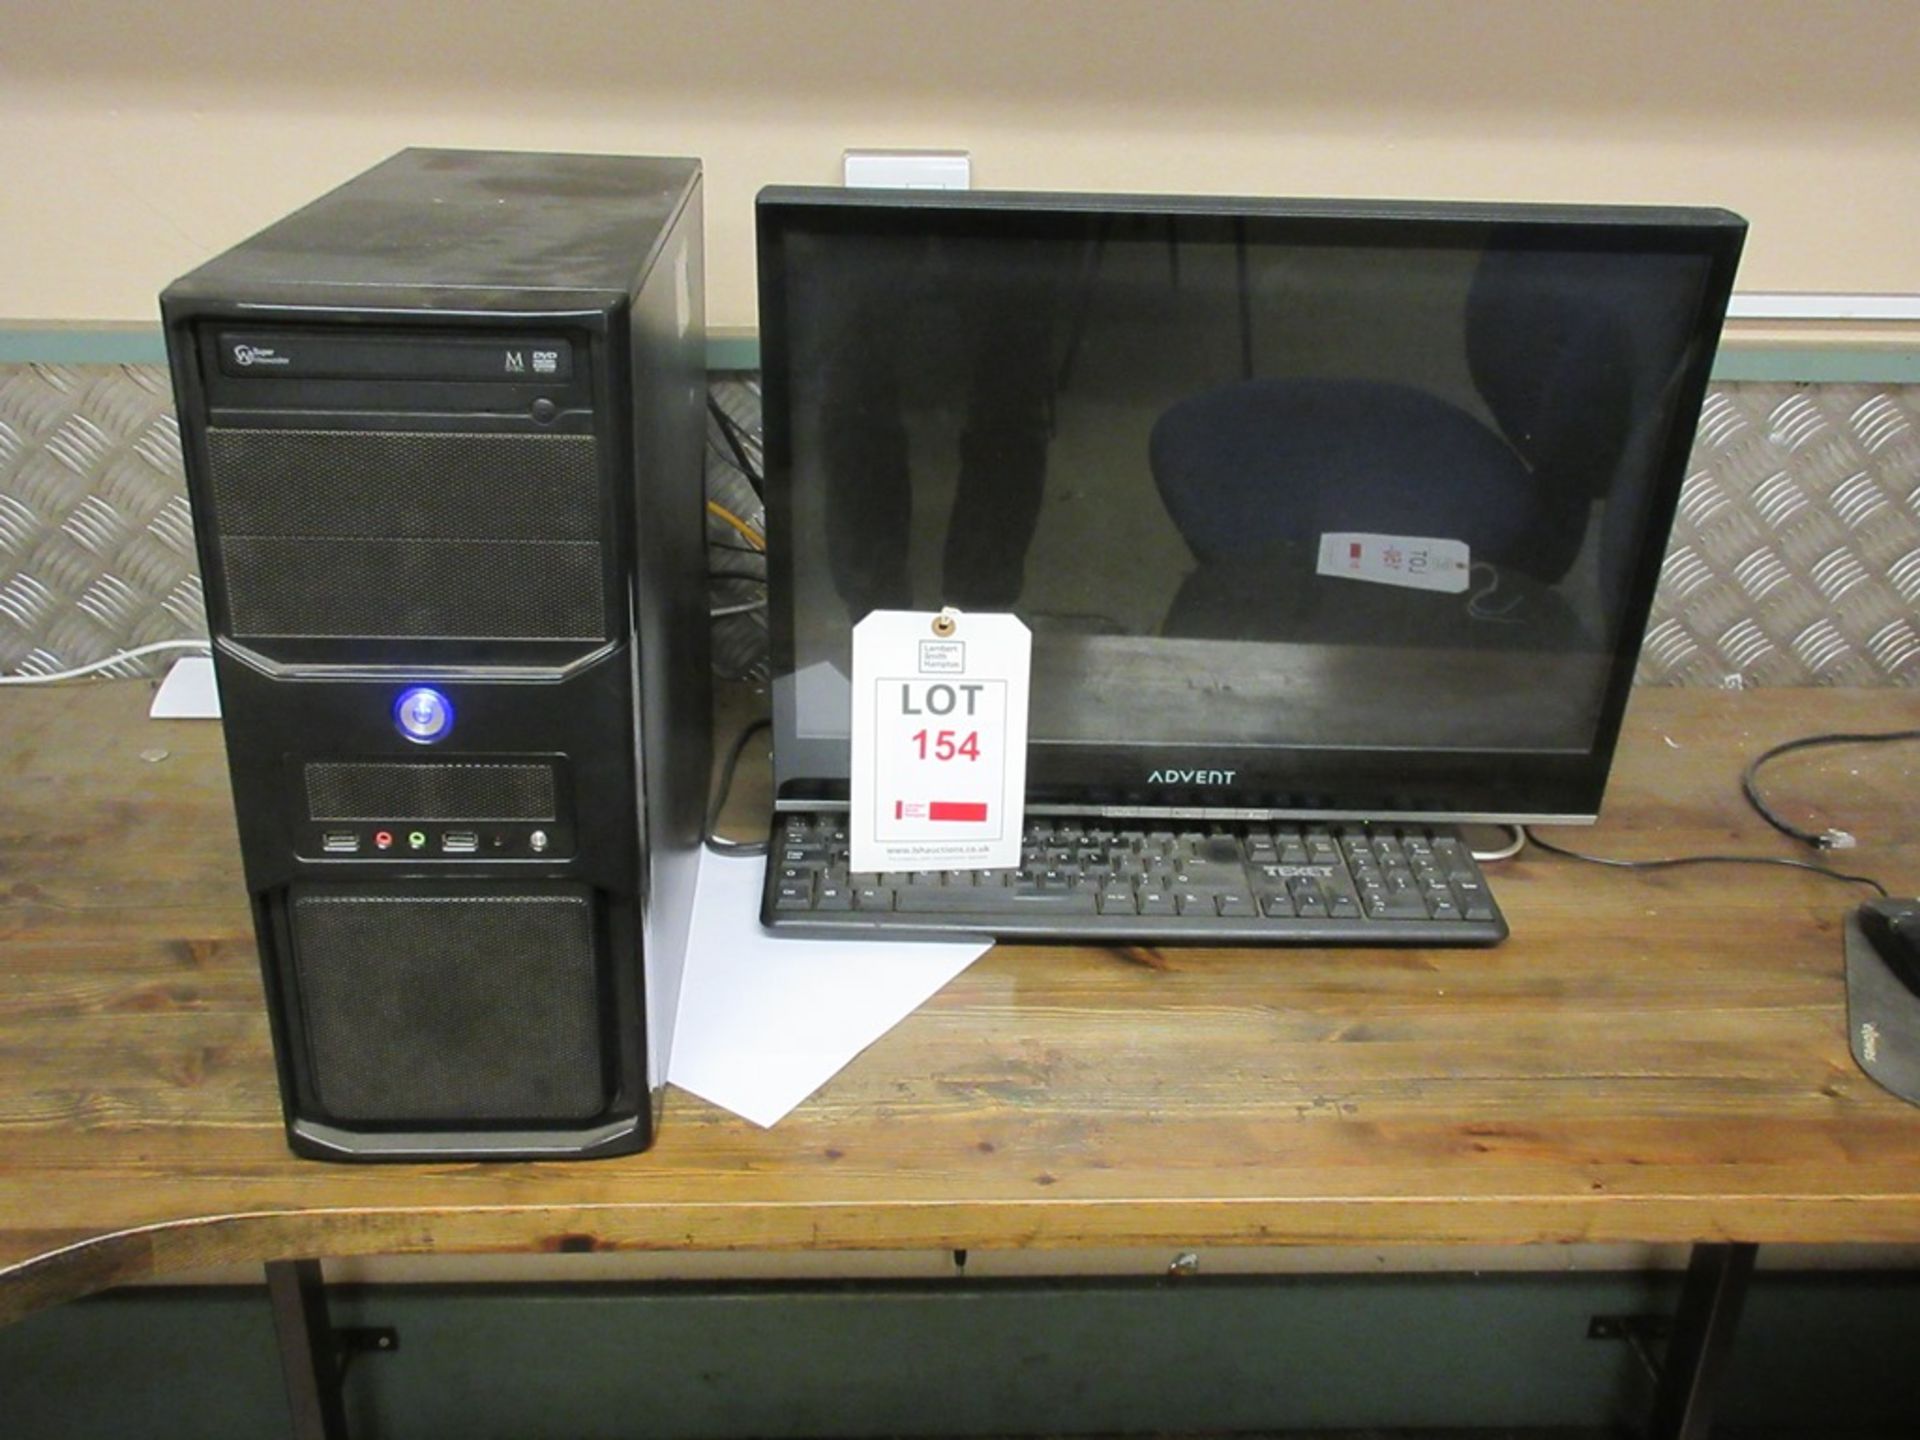 Unbadged computer system, Advent flat screen monitor, keyboard, mouse